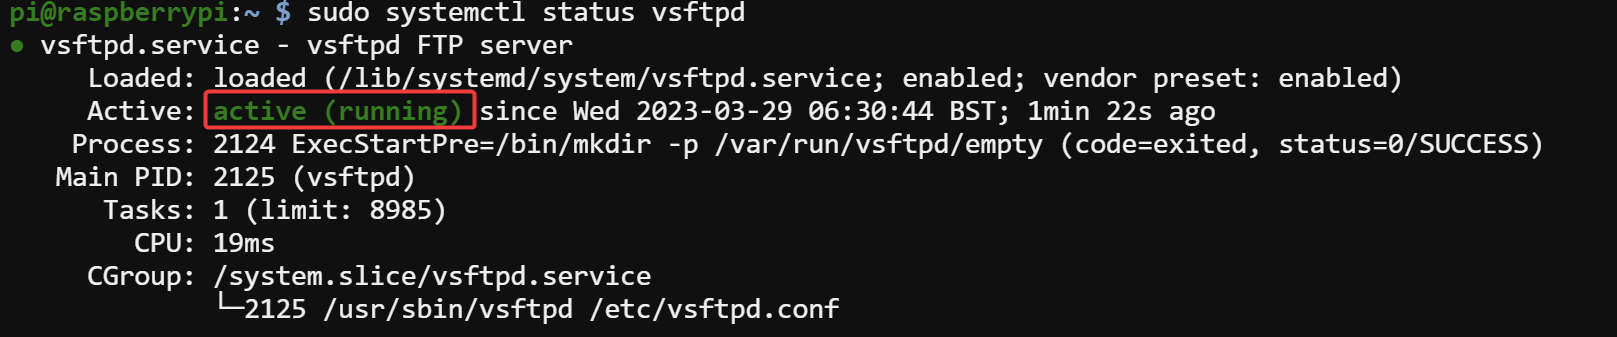 Checking the status of the vsftpd service